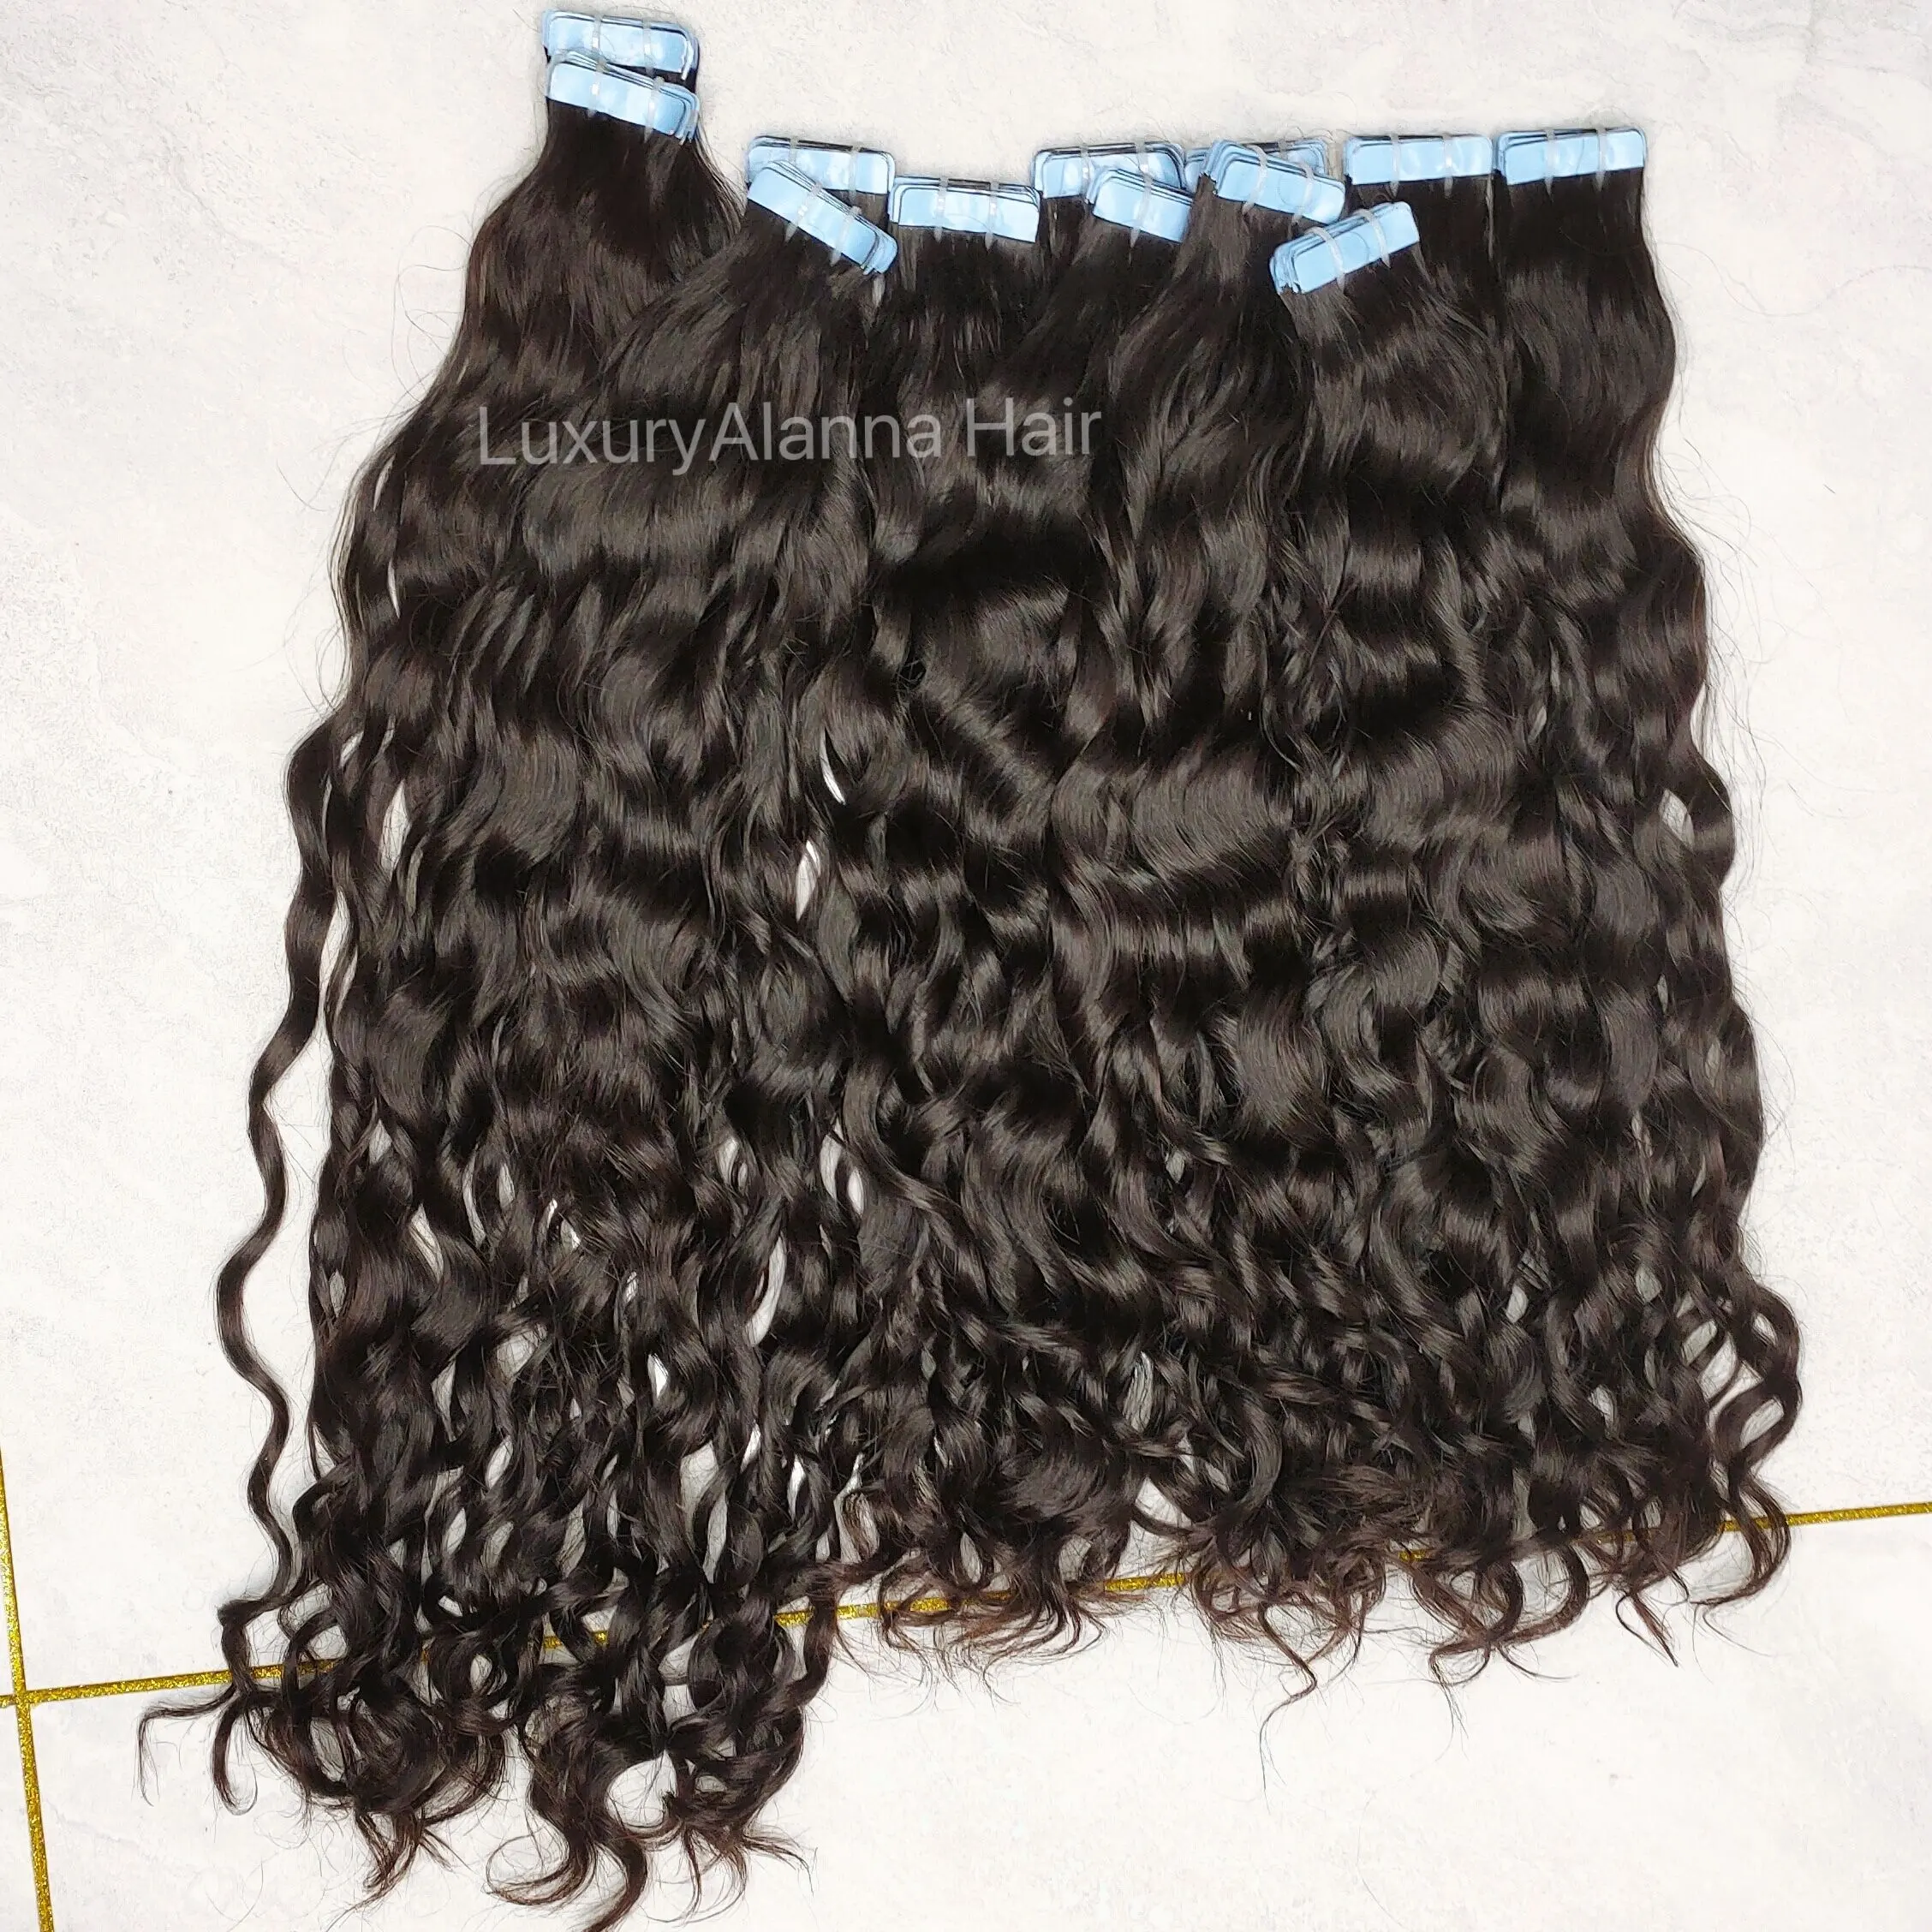 New Arrival Grade 12A Best Quality Cambodian Wavy Tape Ins Hair Extensions 100% Raw Human Hair 40Pieces/100g Tape In Hair